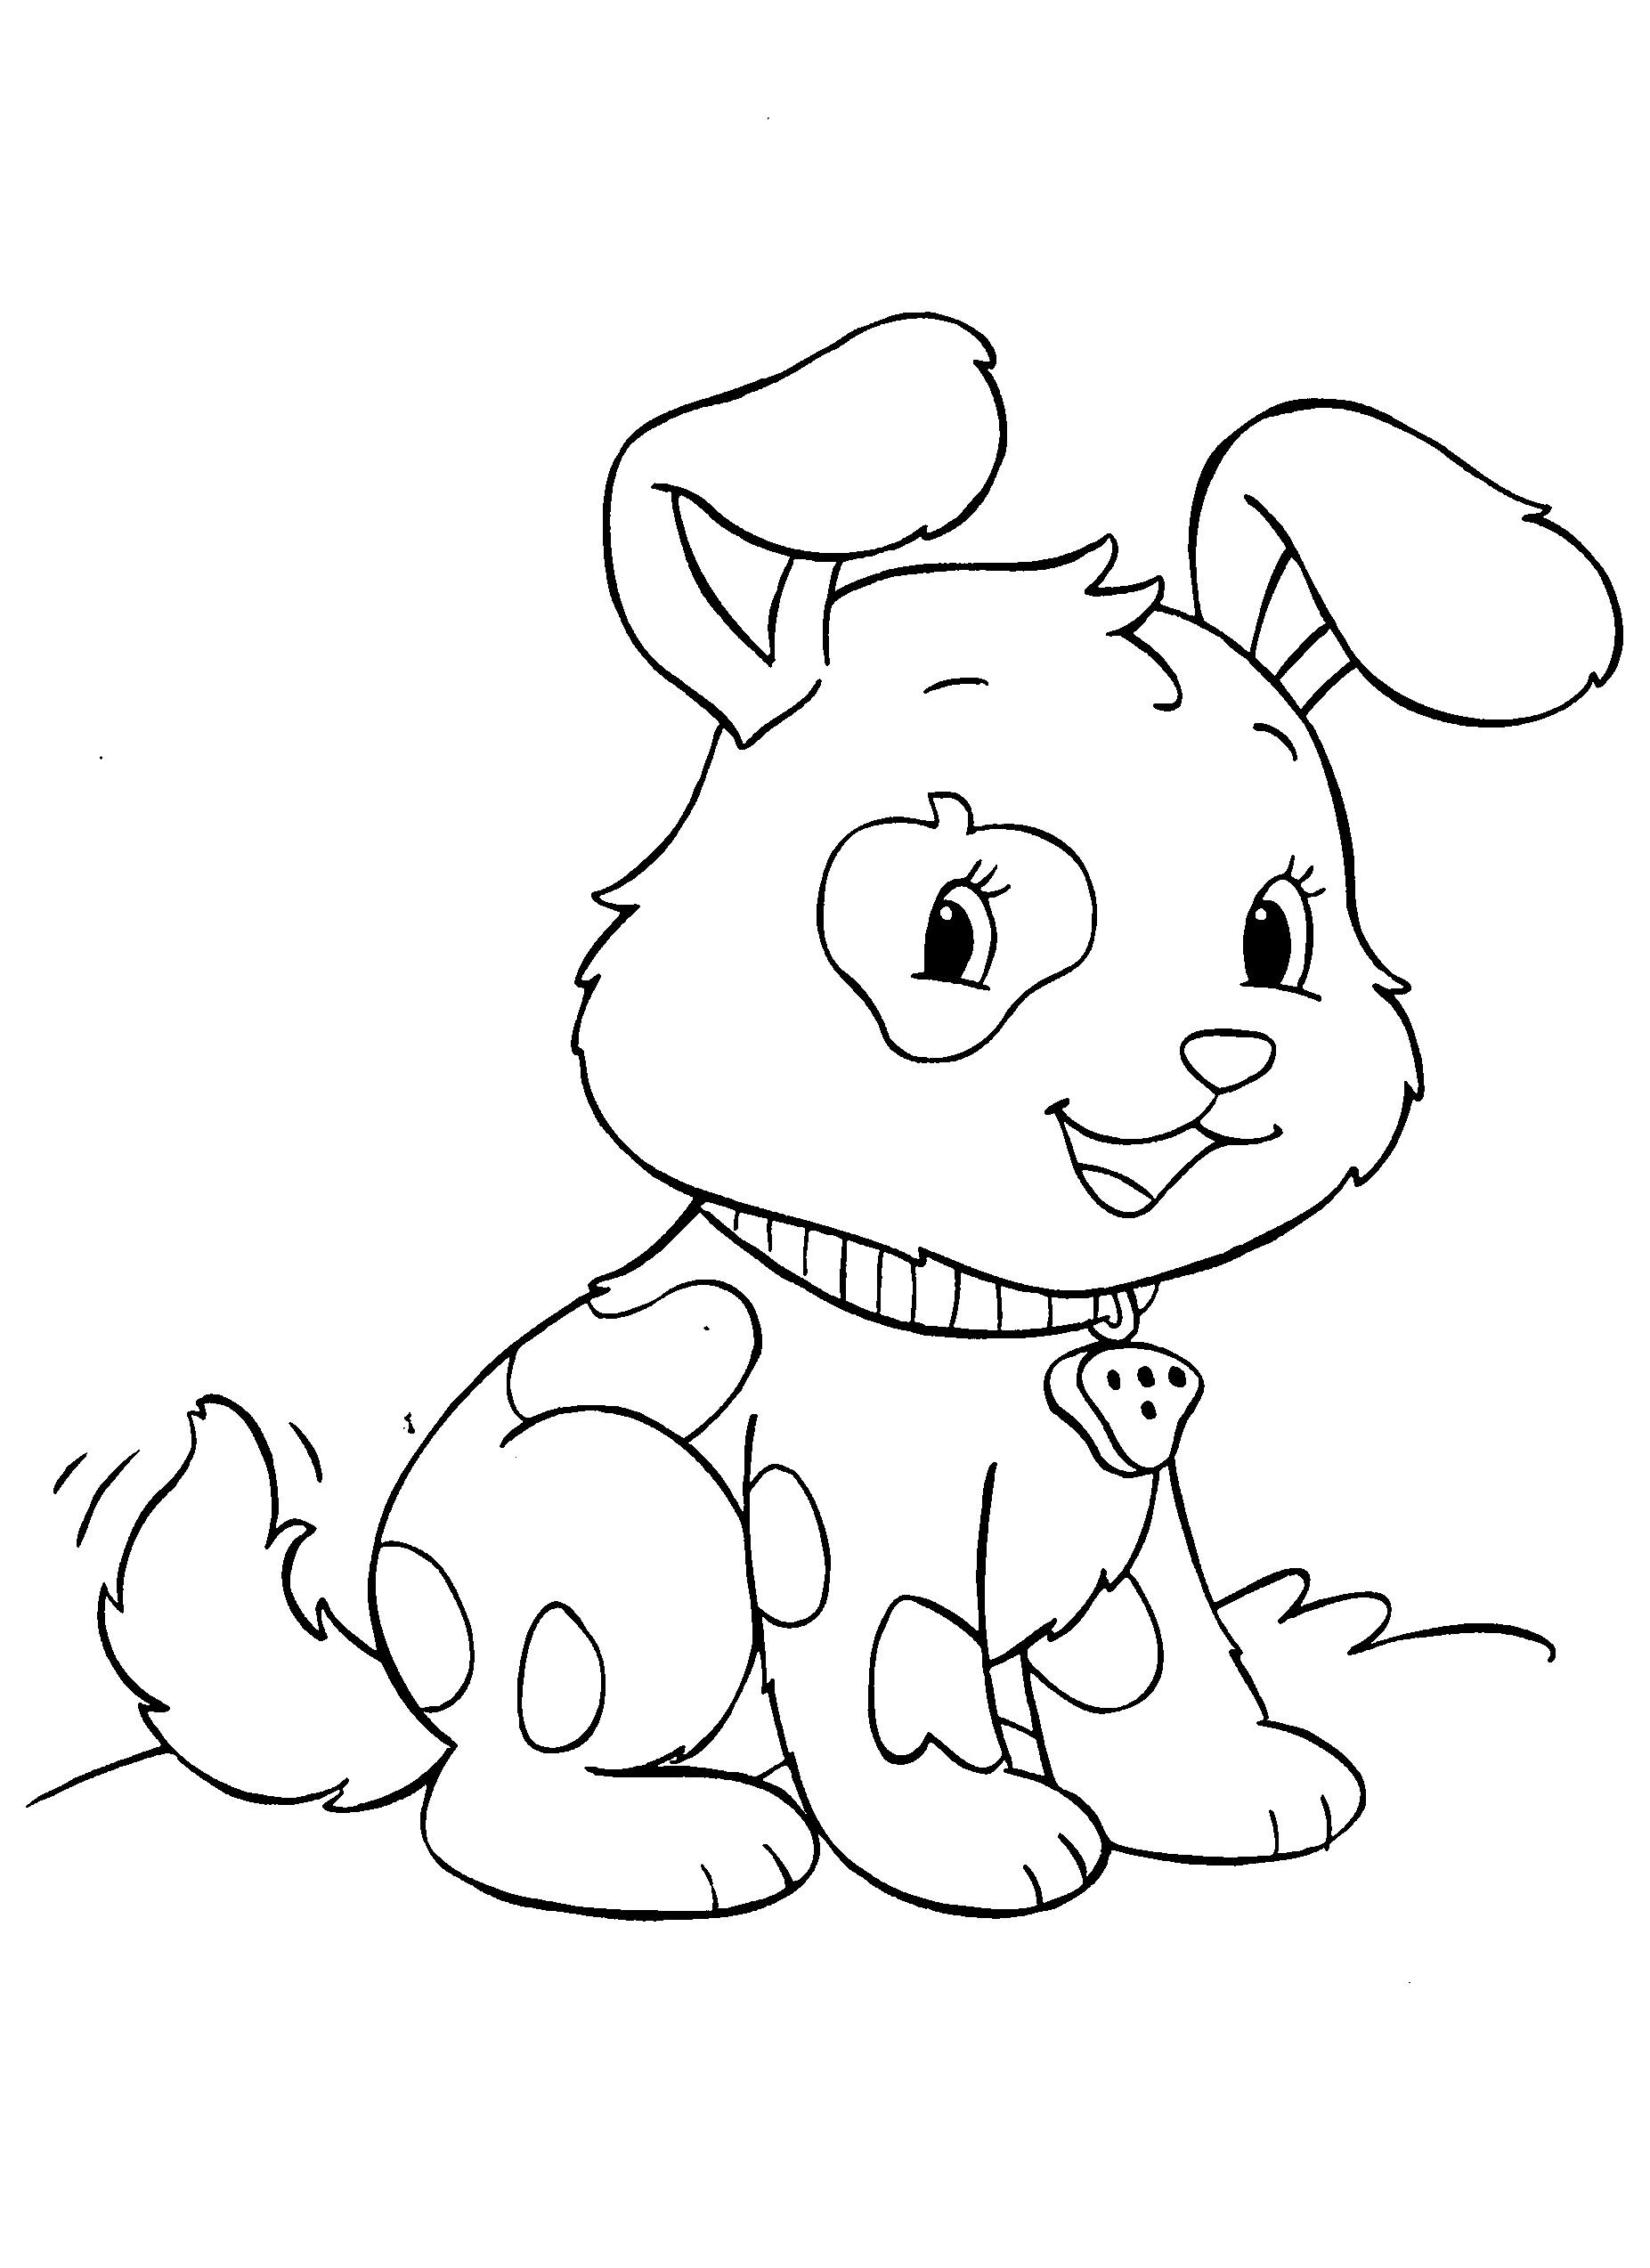 Coloring Pages Puppies Printables | Loren Arts